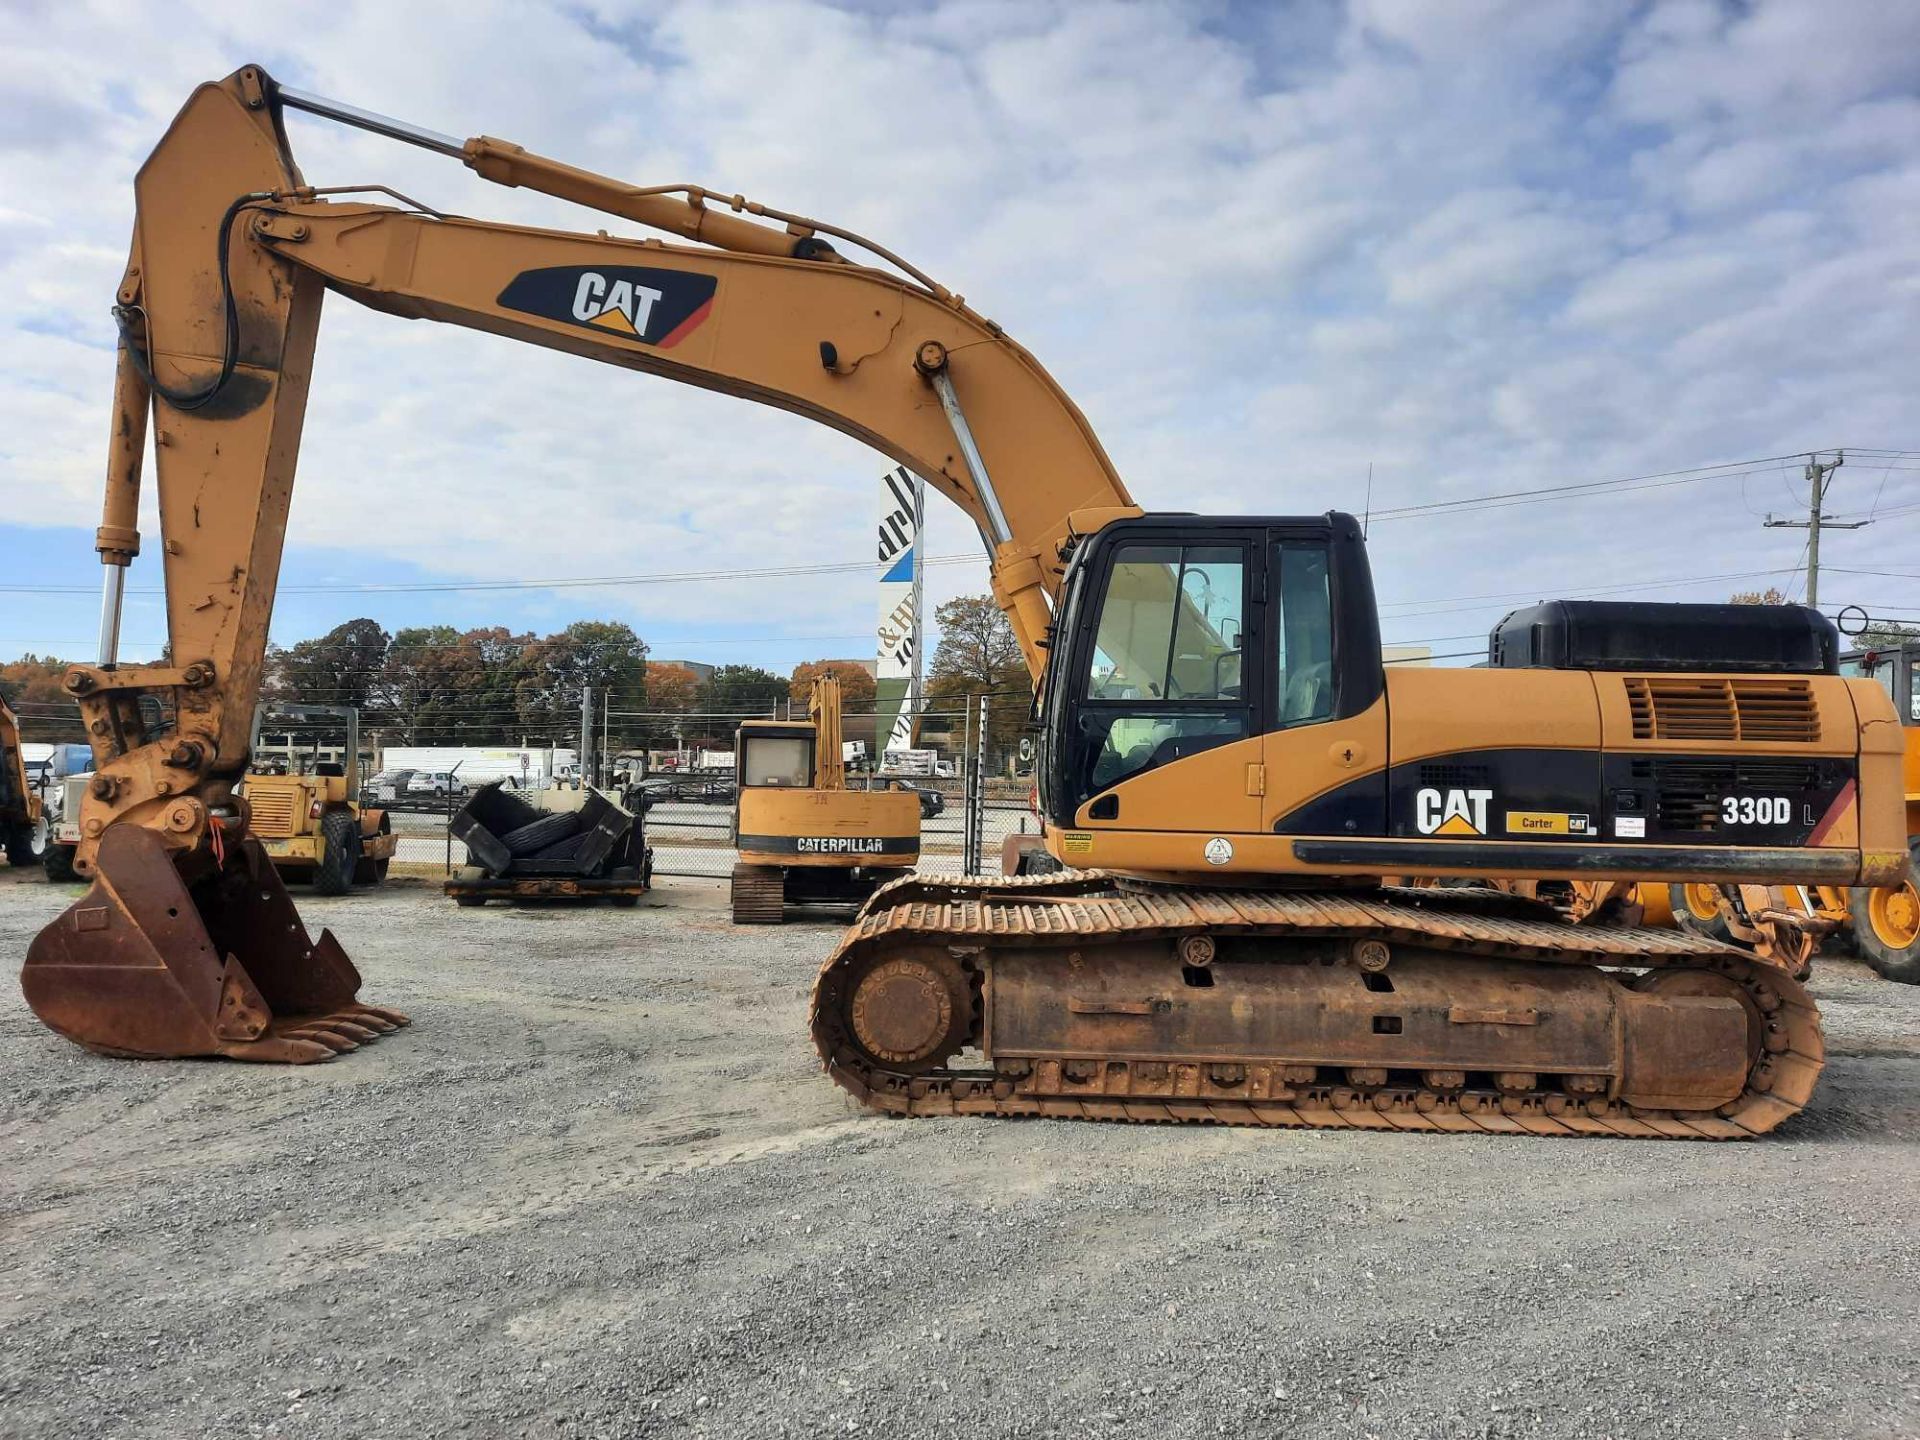 (SUBJECT TO OWNER CONFIRMATION) 2007 Caterpillar 330DL Excavator - Image 3 of 80